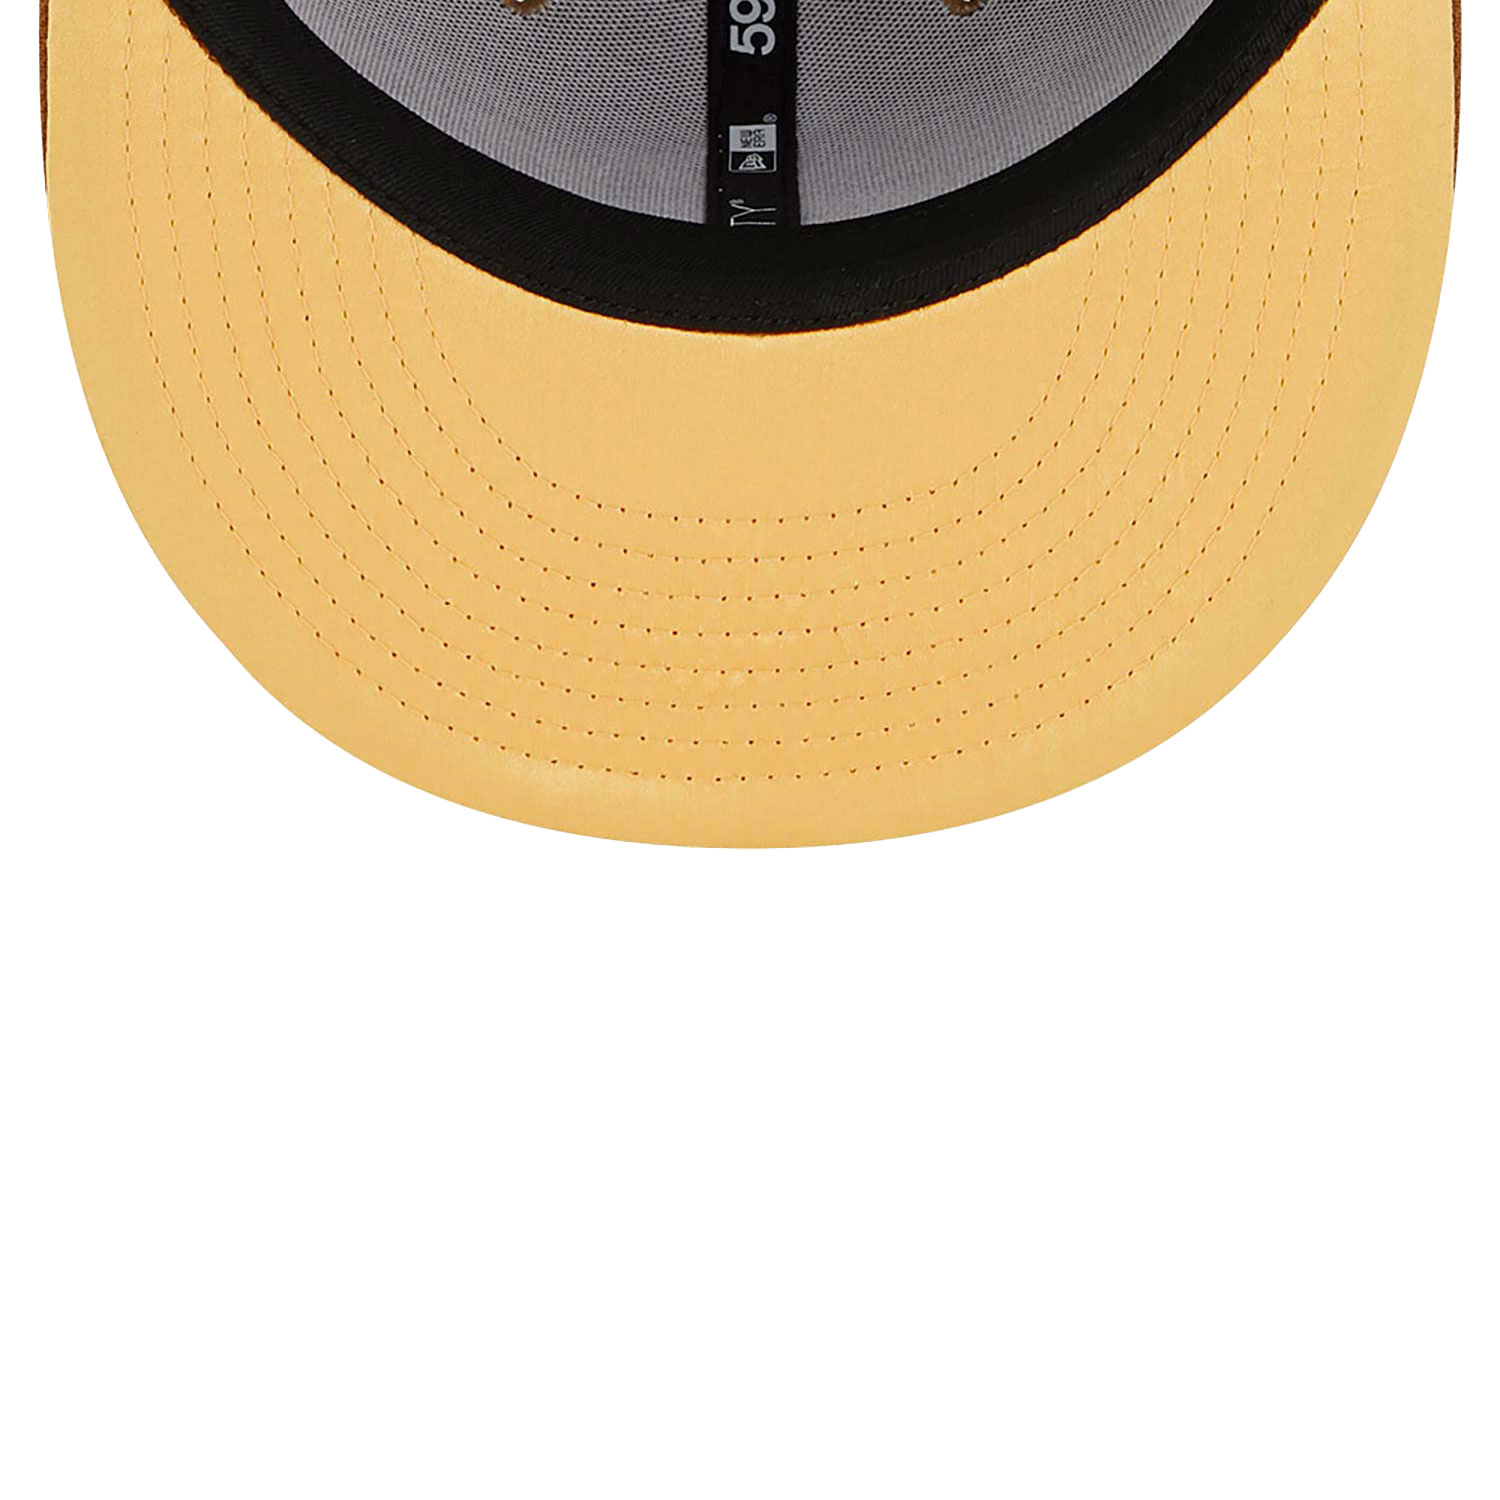 Oakland Athletics Tri Tone Brown 59FIFTY Fitted Cap